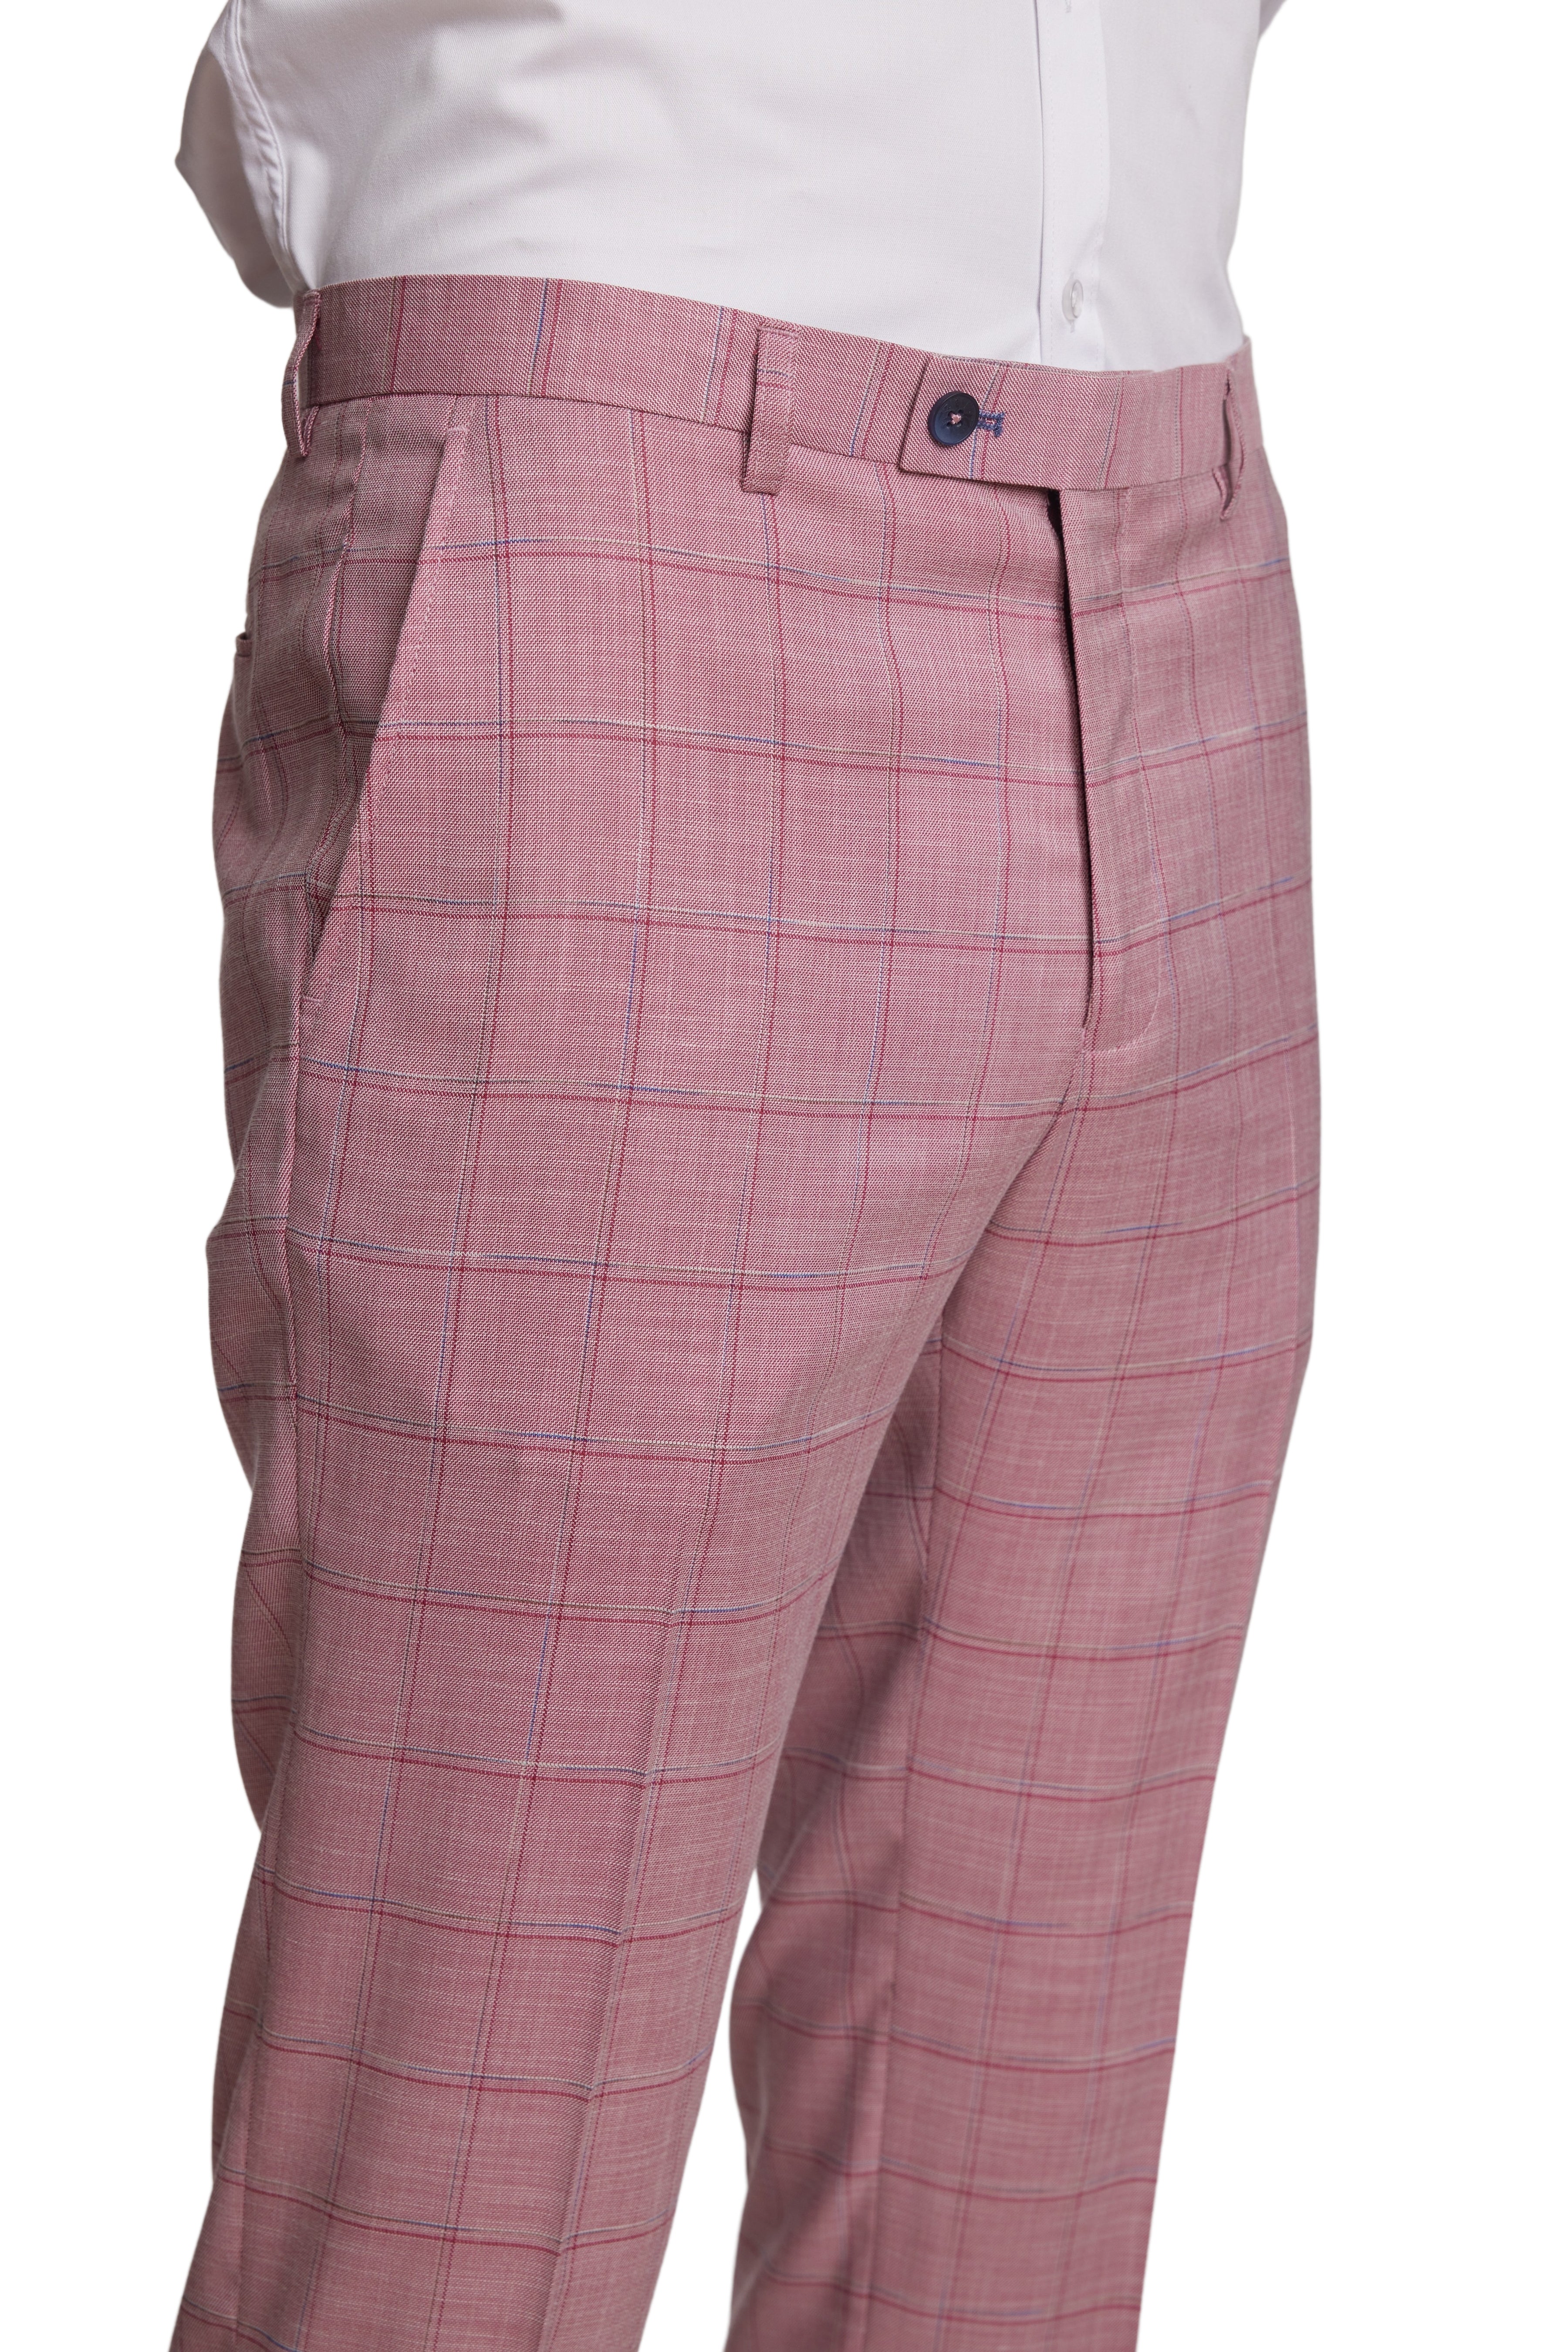 Downing Pants - slim - Pink Double Check